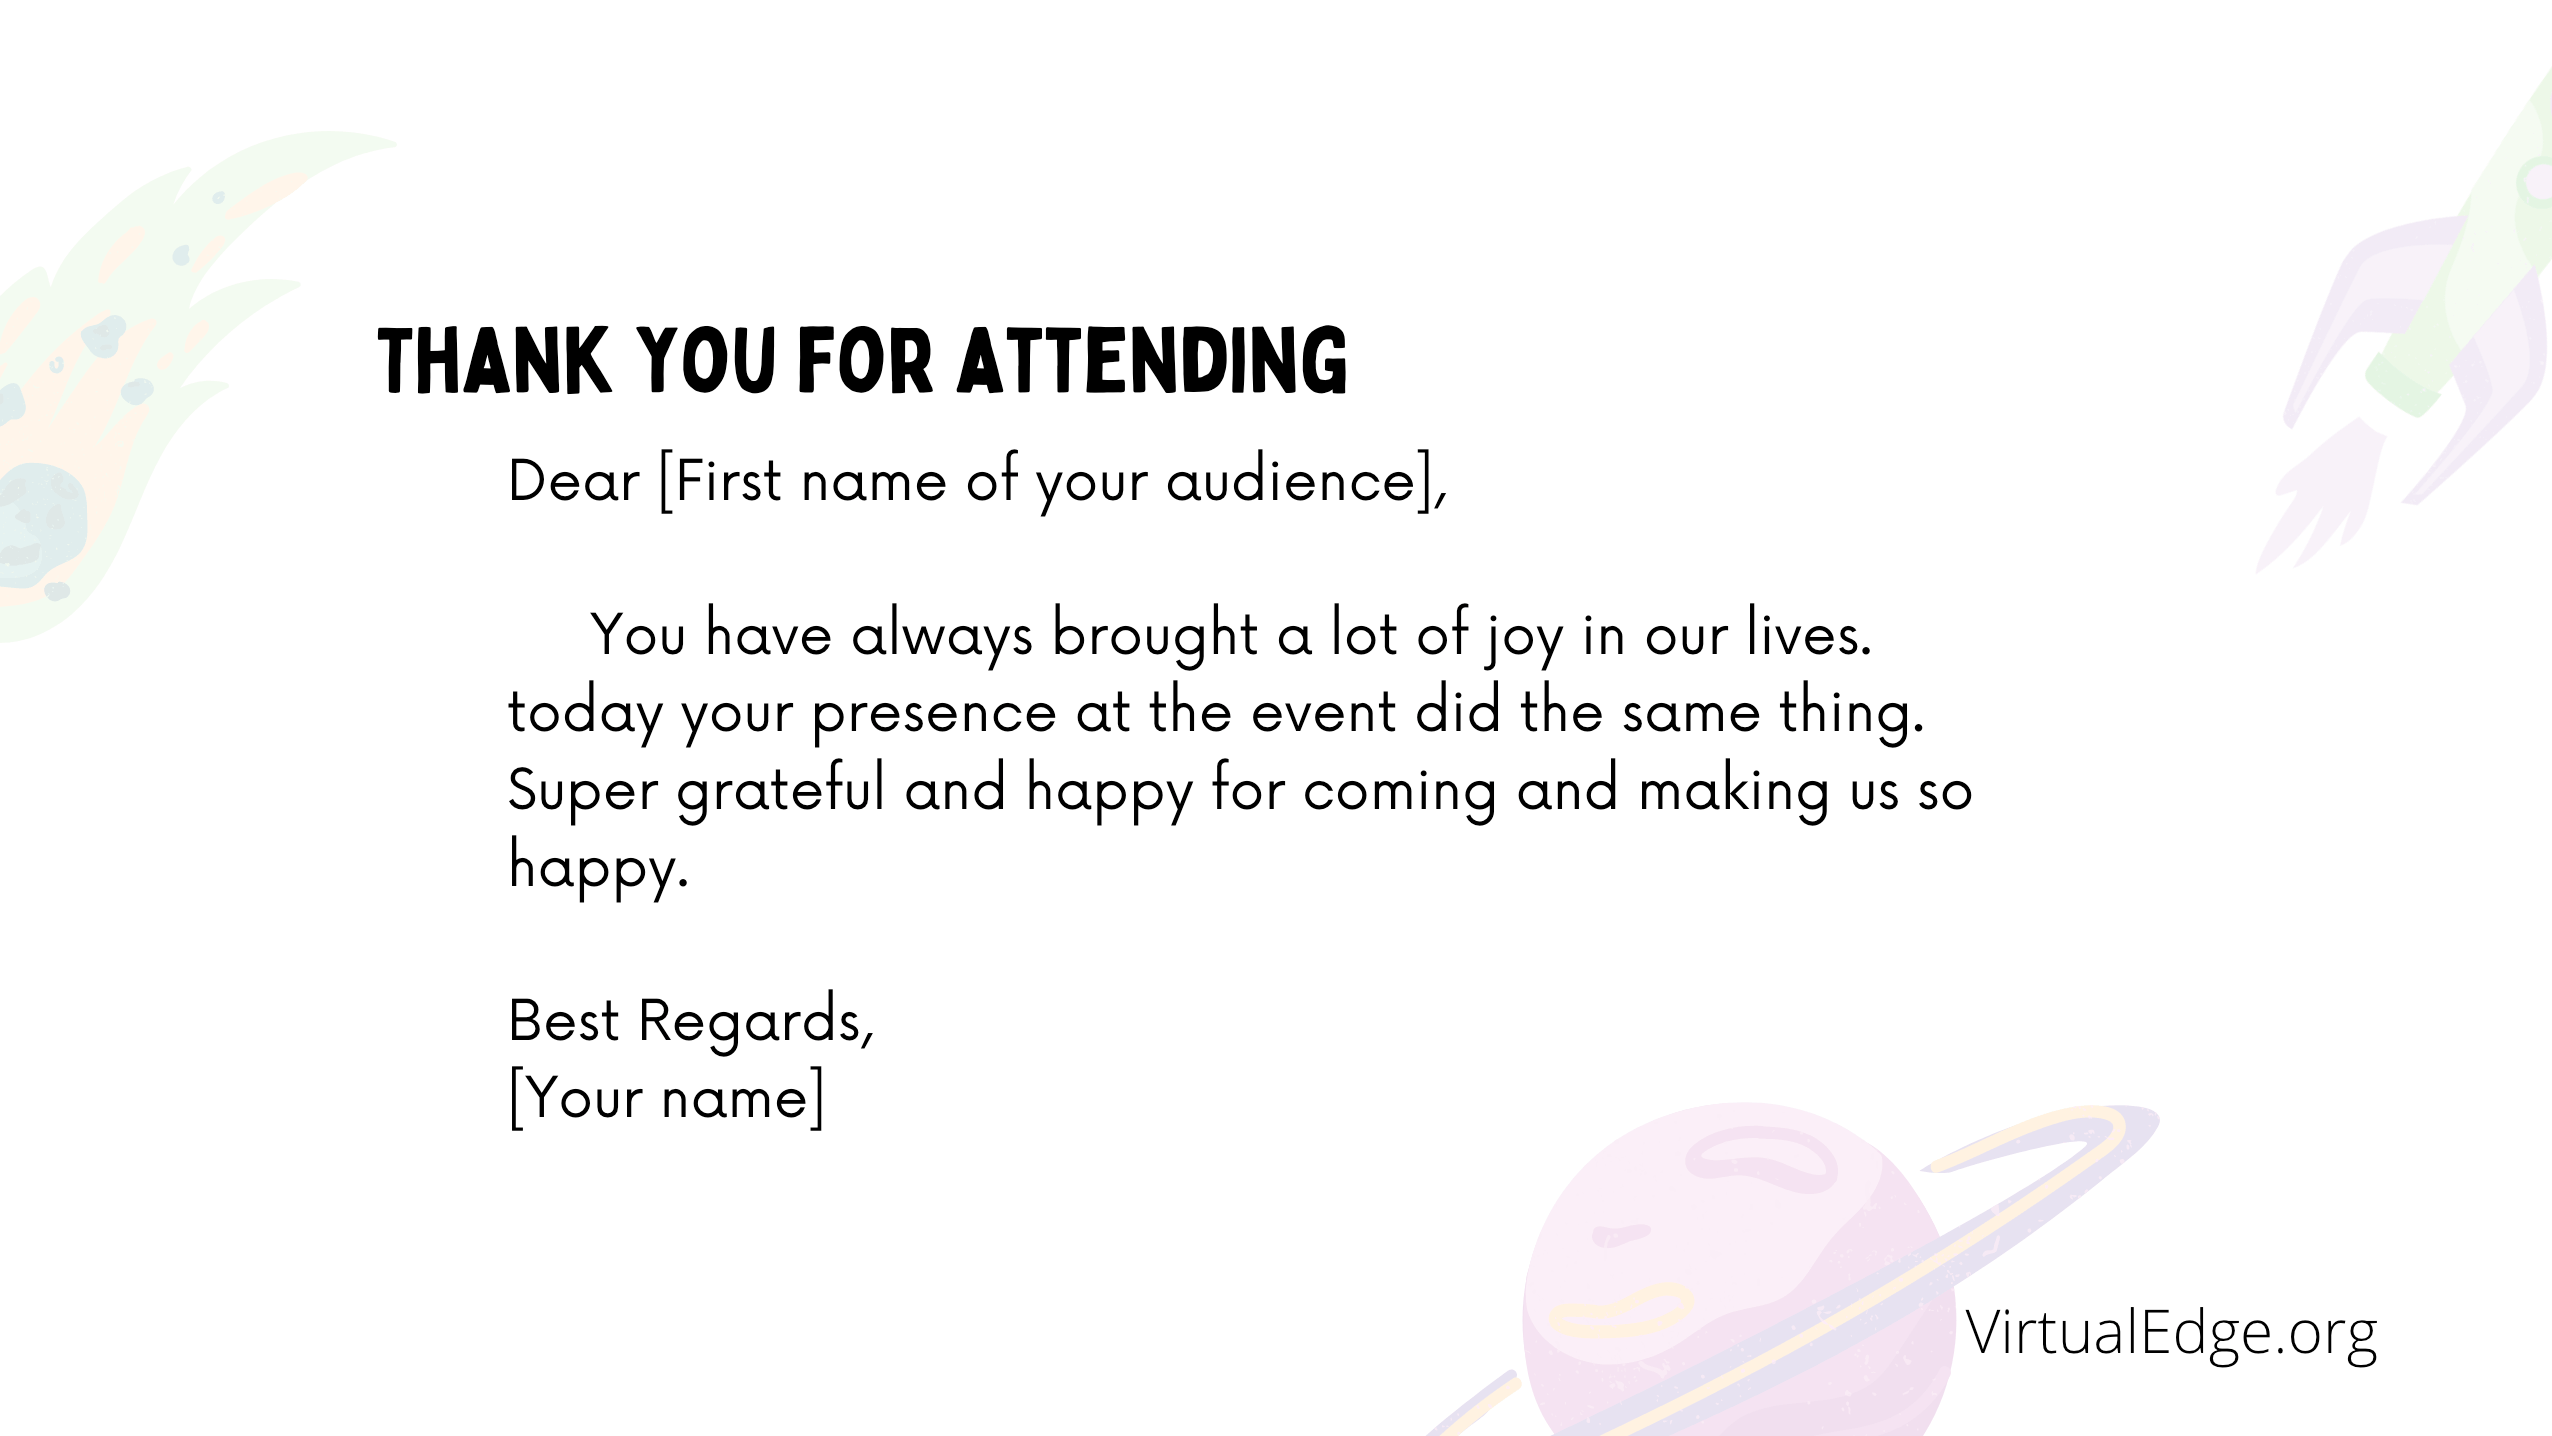 Thank you for attending letter